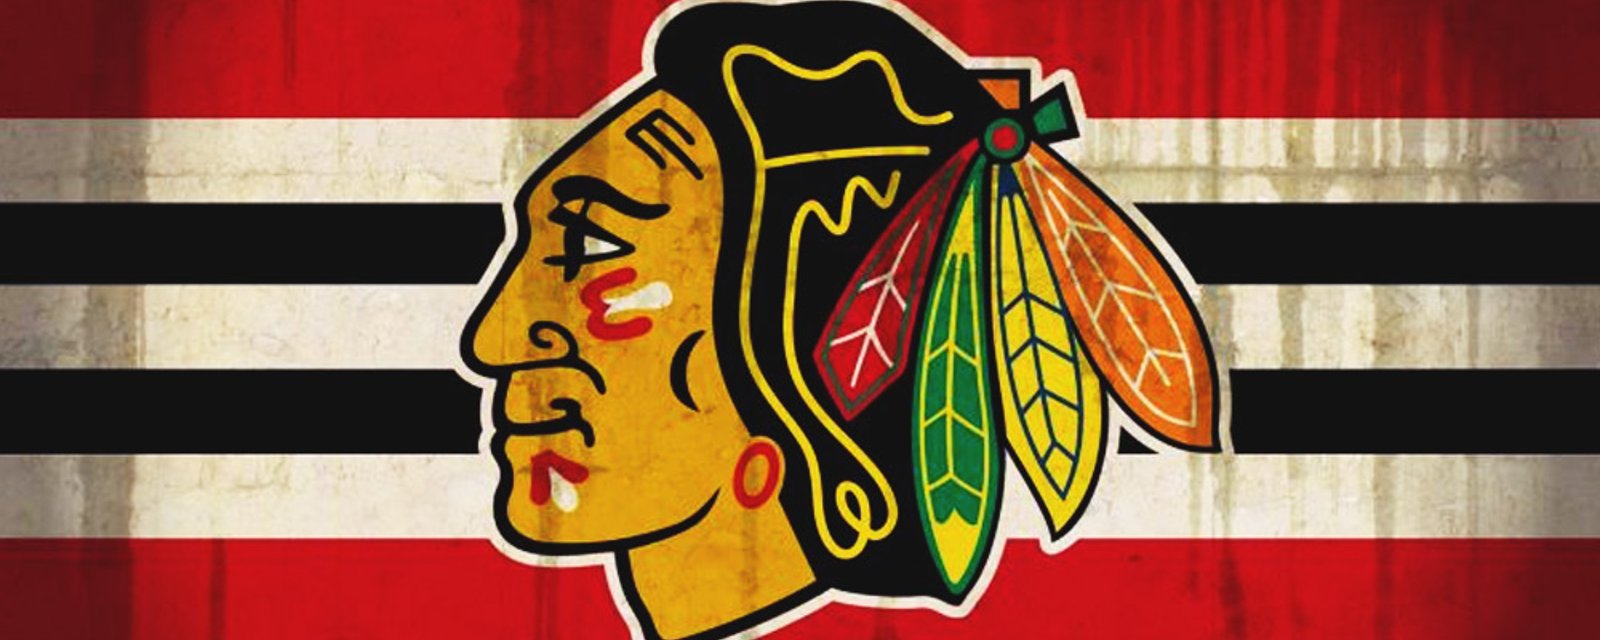 BREAKING: The Chicago Blackhawks have yet relieved another coach.